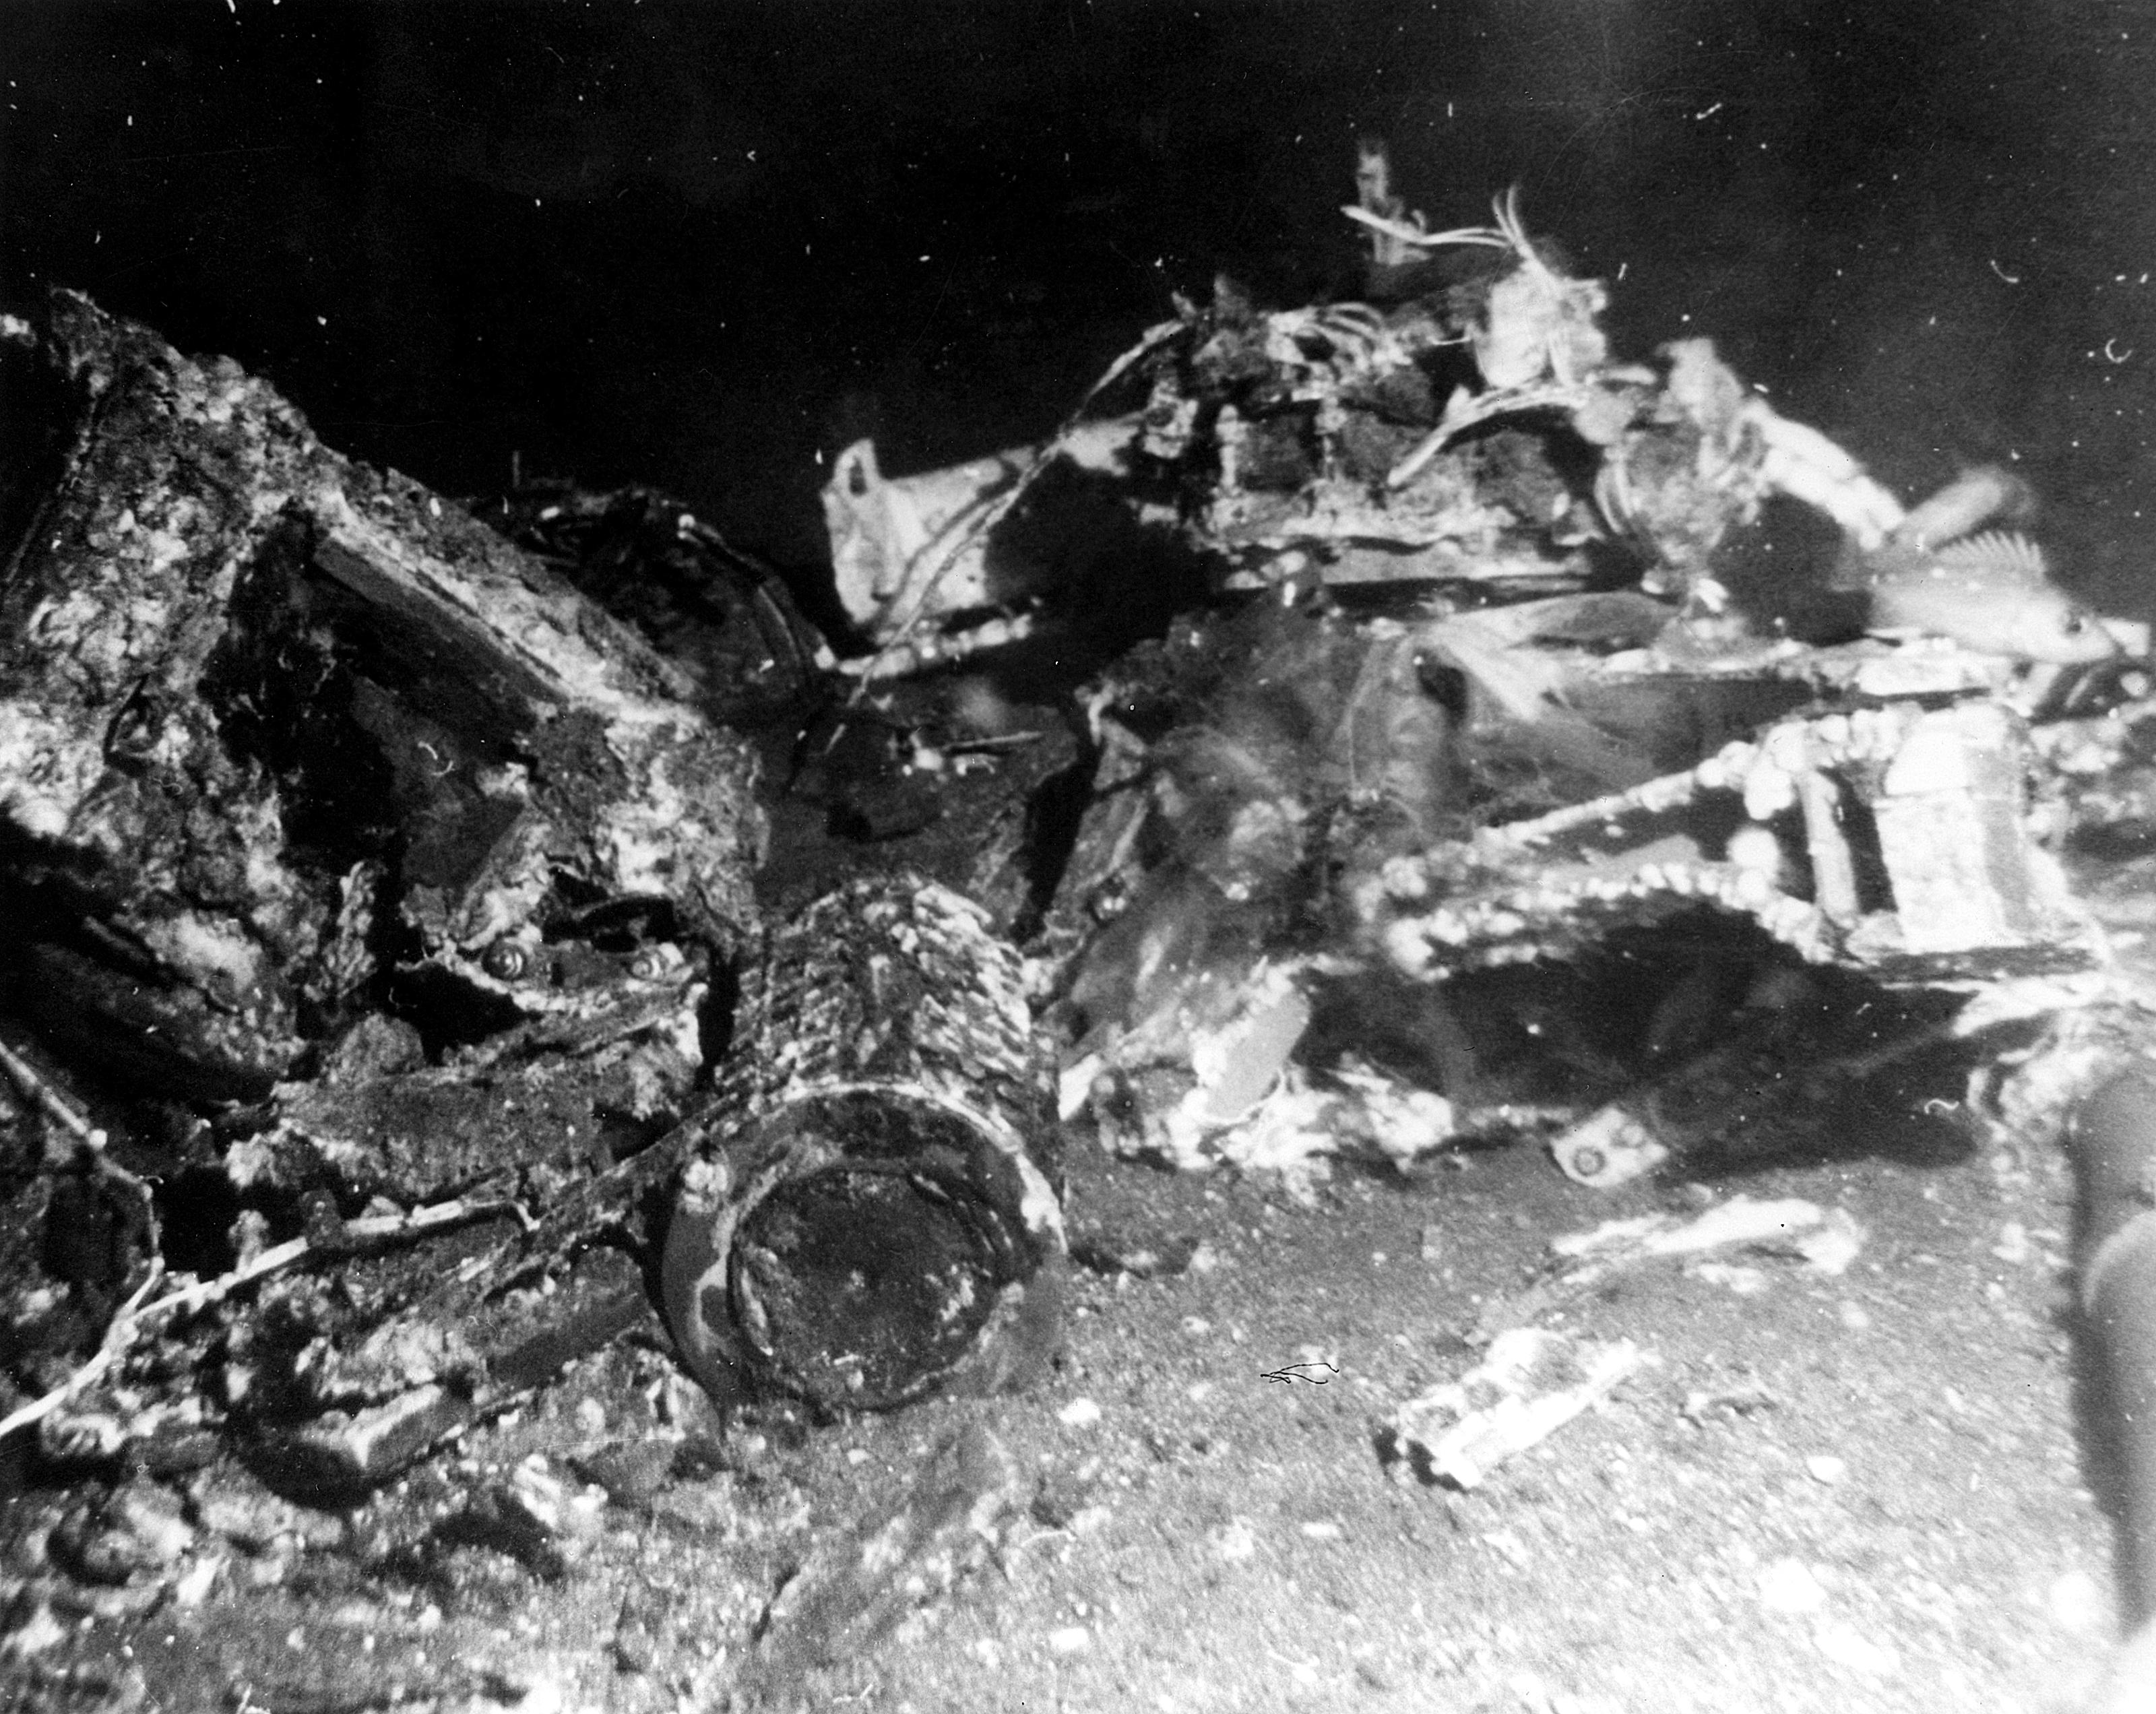 Wreckage on the sea flooer, including a cylinder in the foreground.